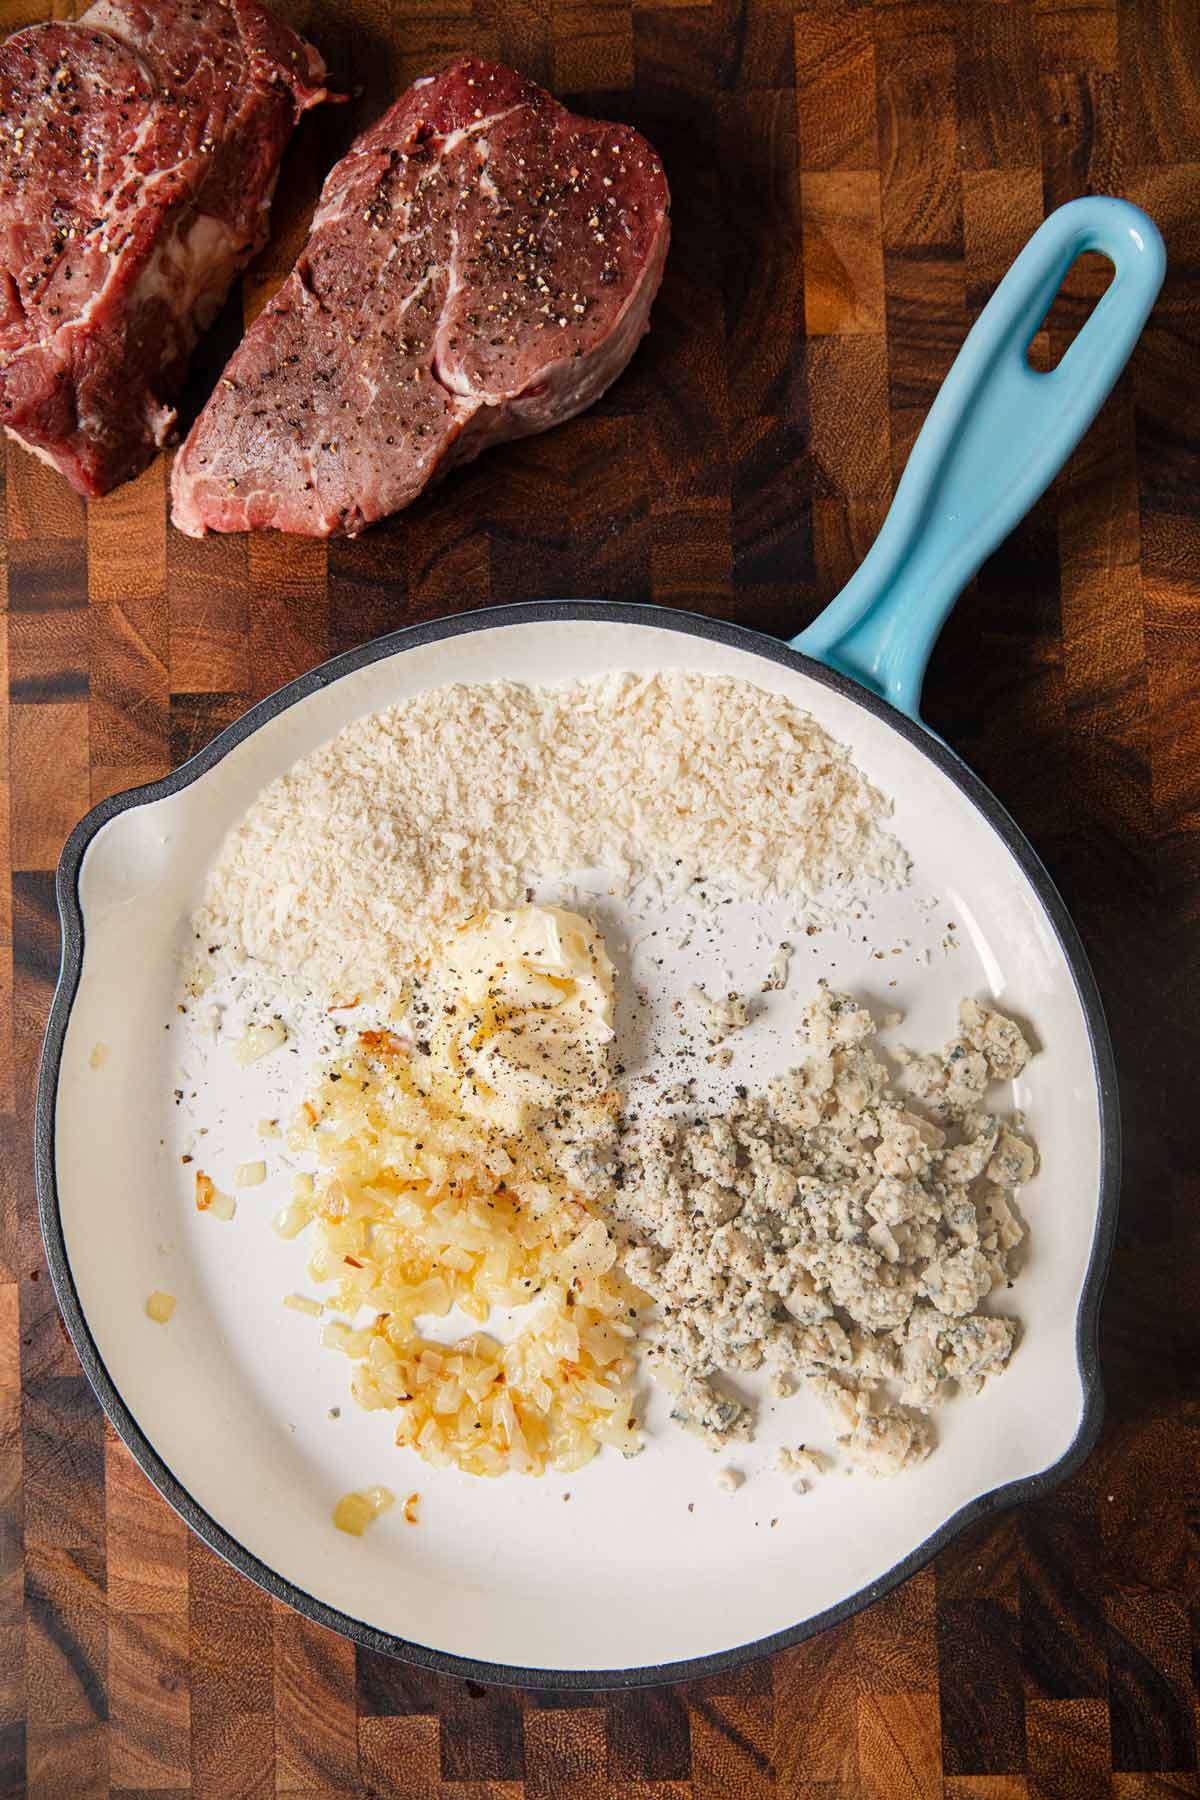 Blue Cheese Crusted Filet Mignon ingredients in skillet